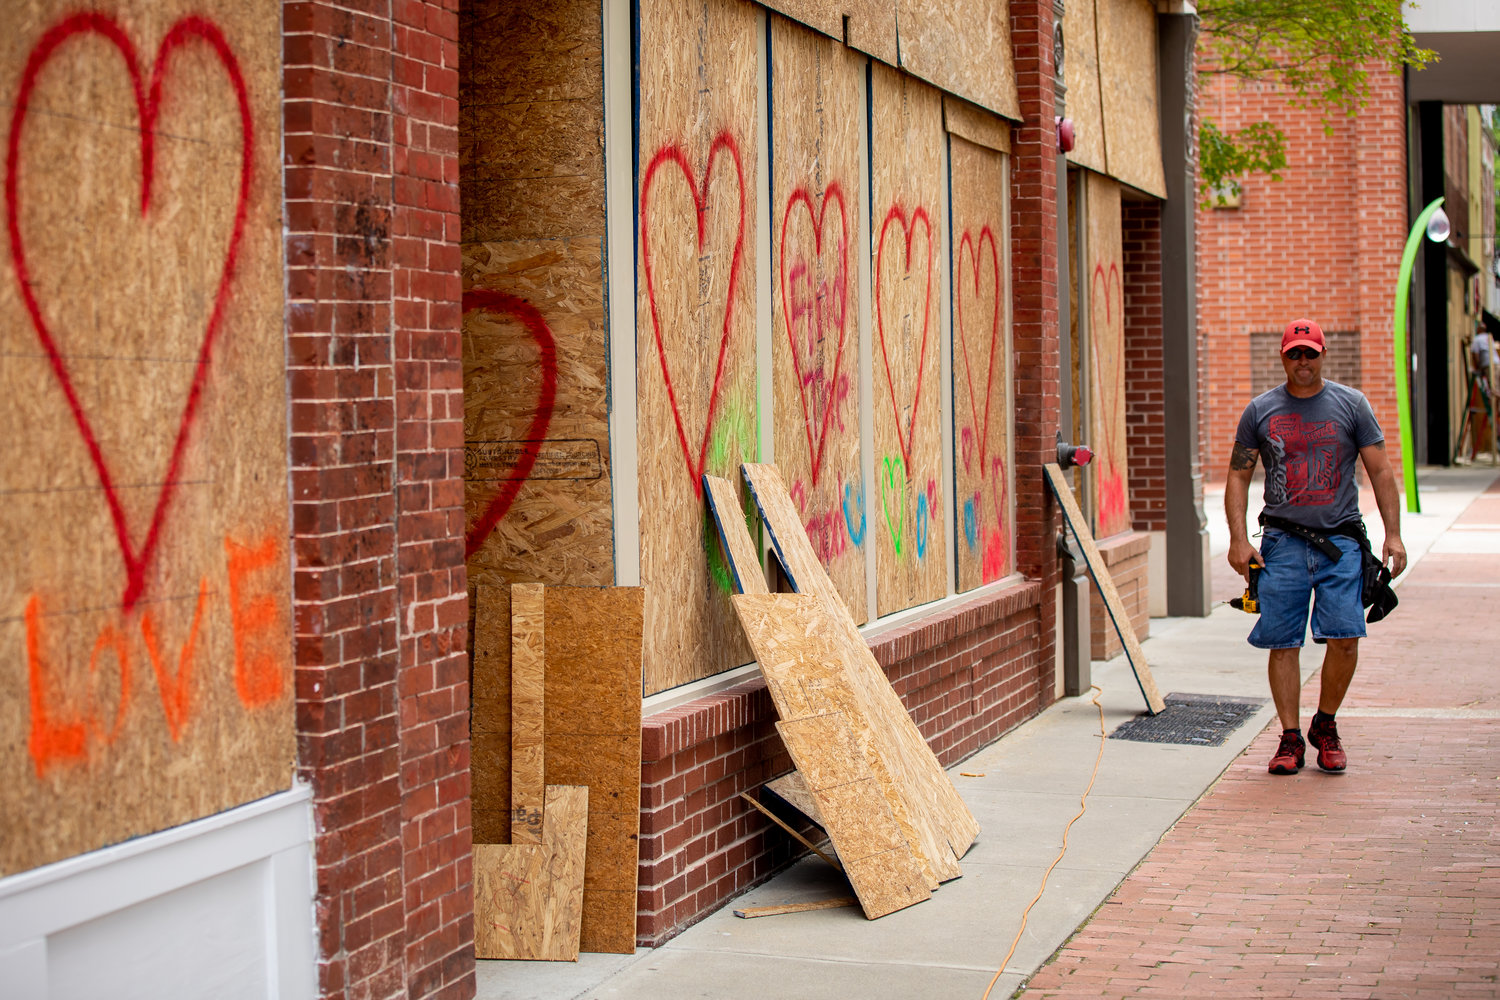 Business owners and volunteers on May 31, 2020, worked to clean up damage after downtown storefront windows were smashed the night before when protests turned violent.